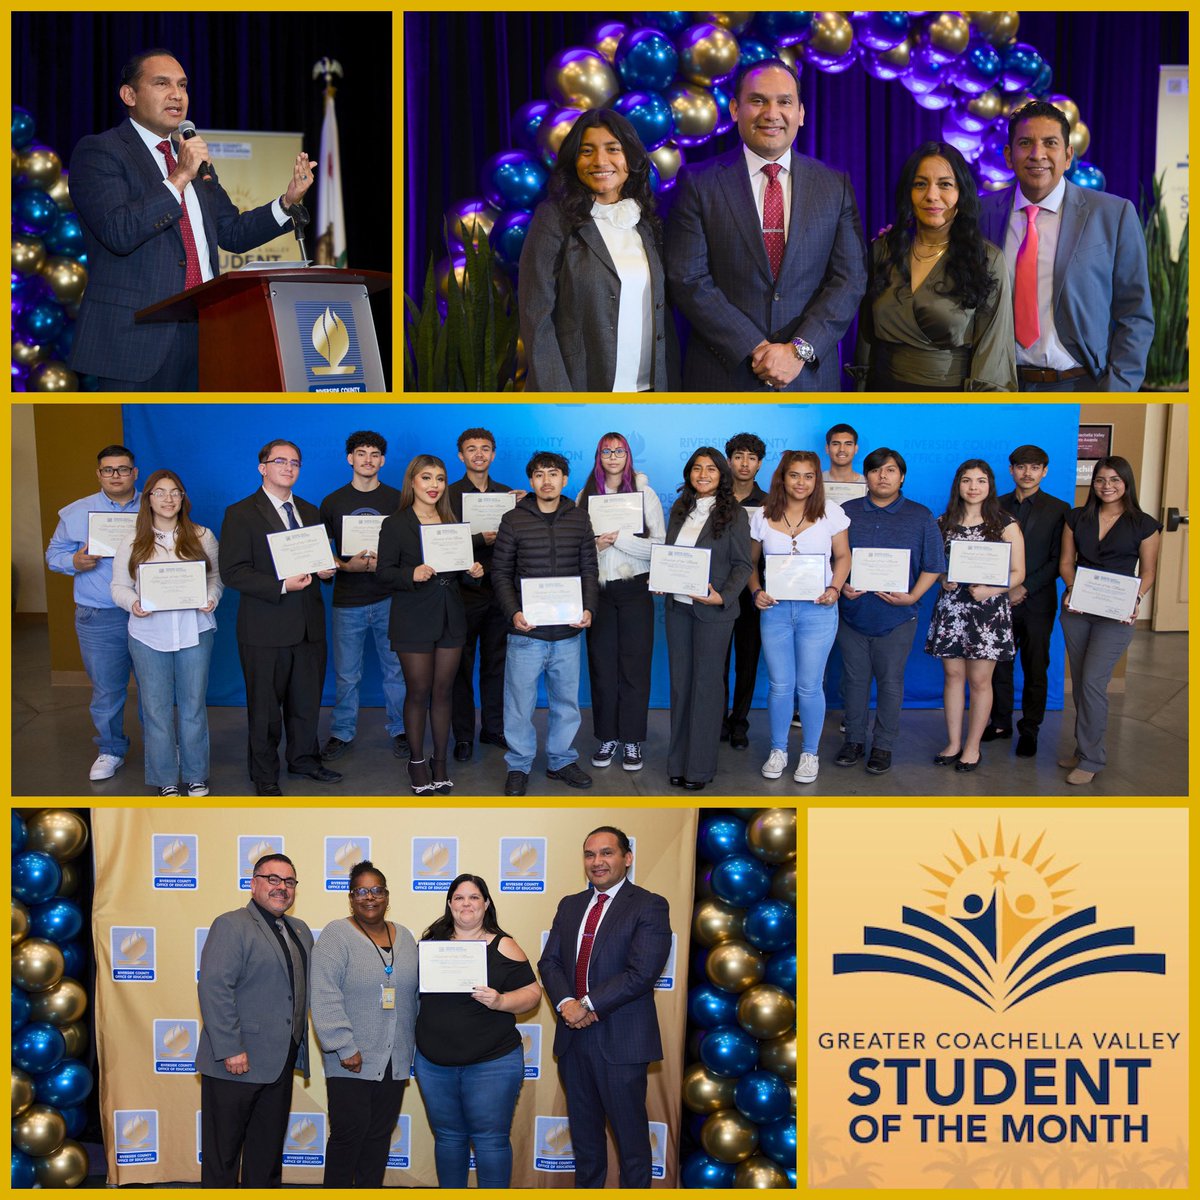 Wonderful morning at Fantasy Springs Events Center in Indio to celebrate 21 Greater Coachella Valley Students of the Month. High school students from @PSUSD, @DesertSandsUSD, @CVUnified, and RCOE programs were honored at a breakfast awards ceremony in their honor.